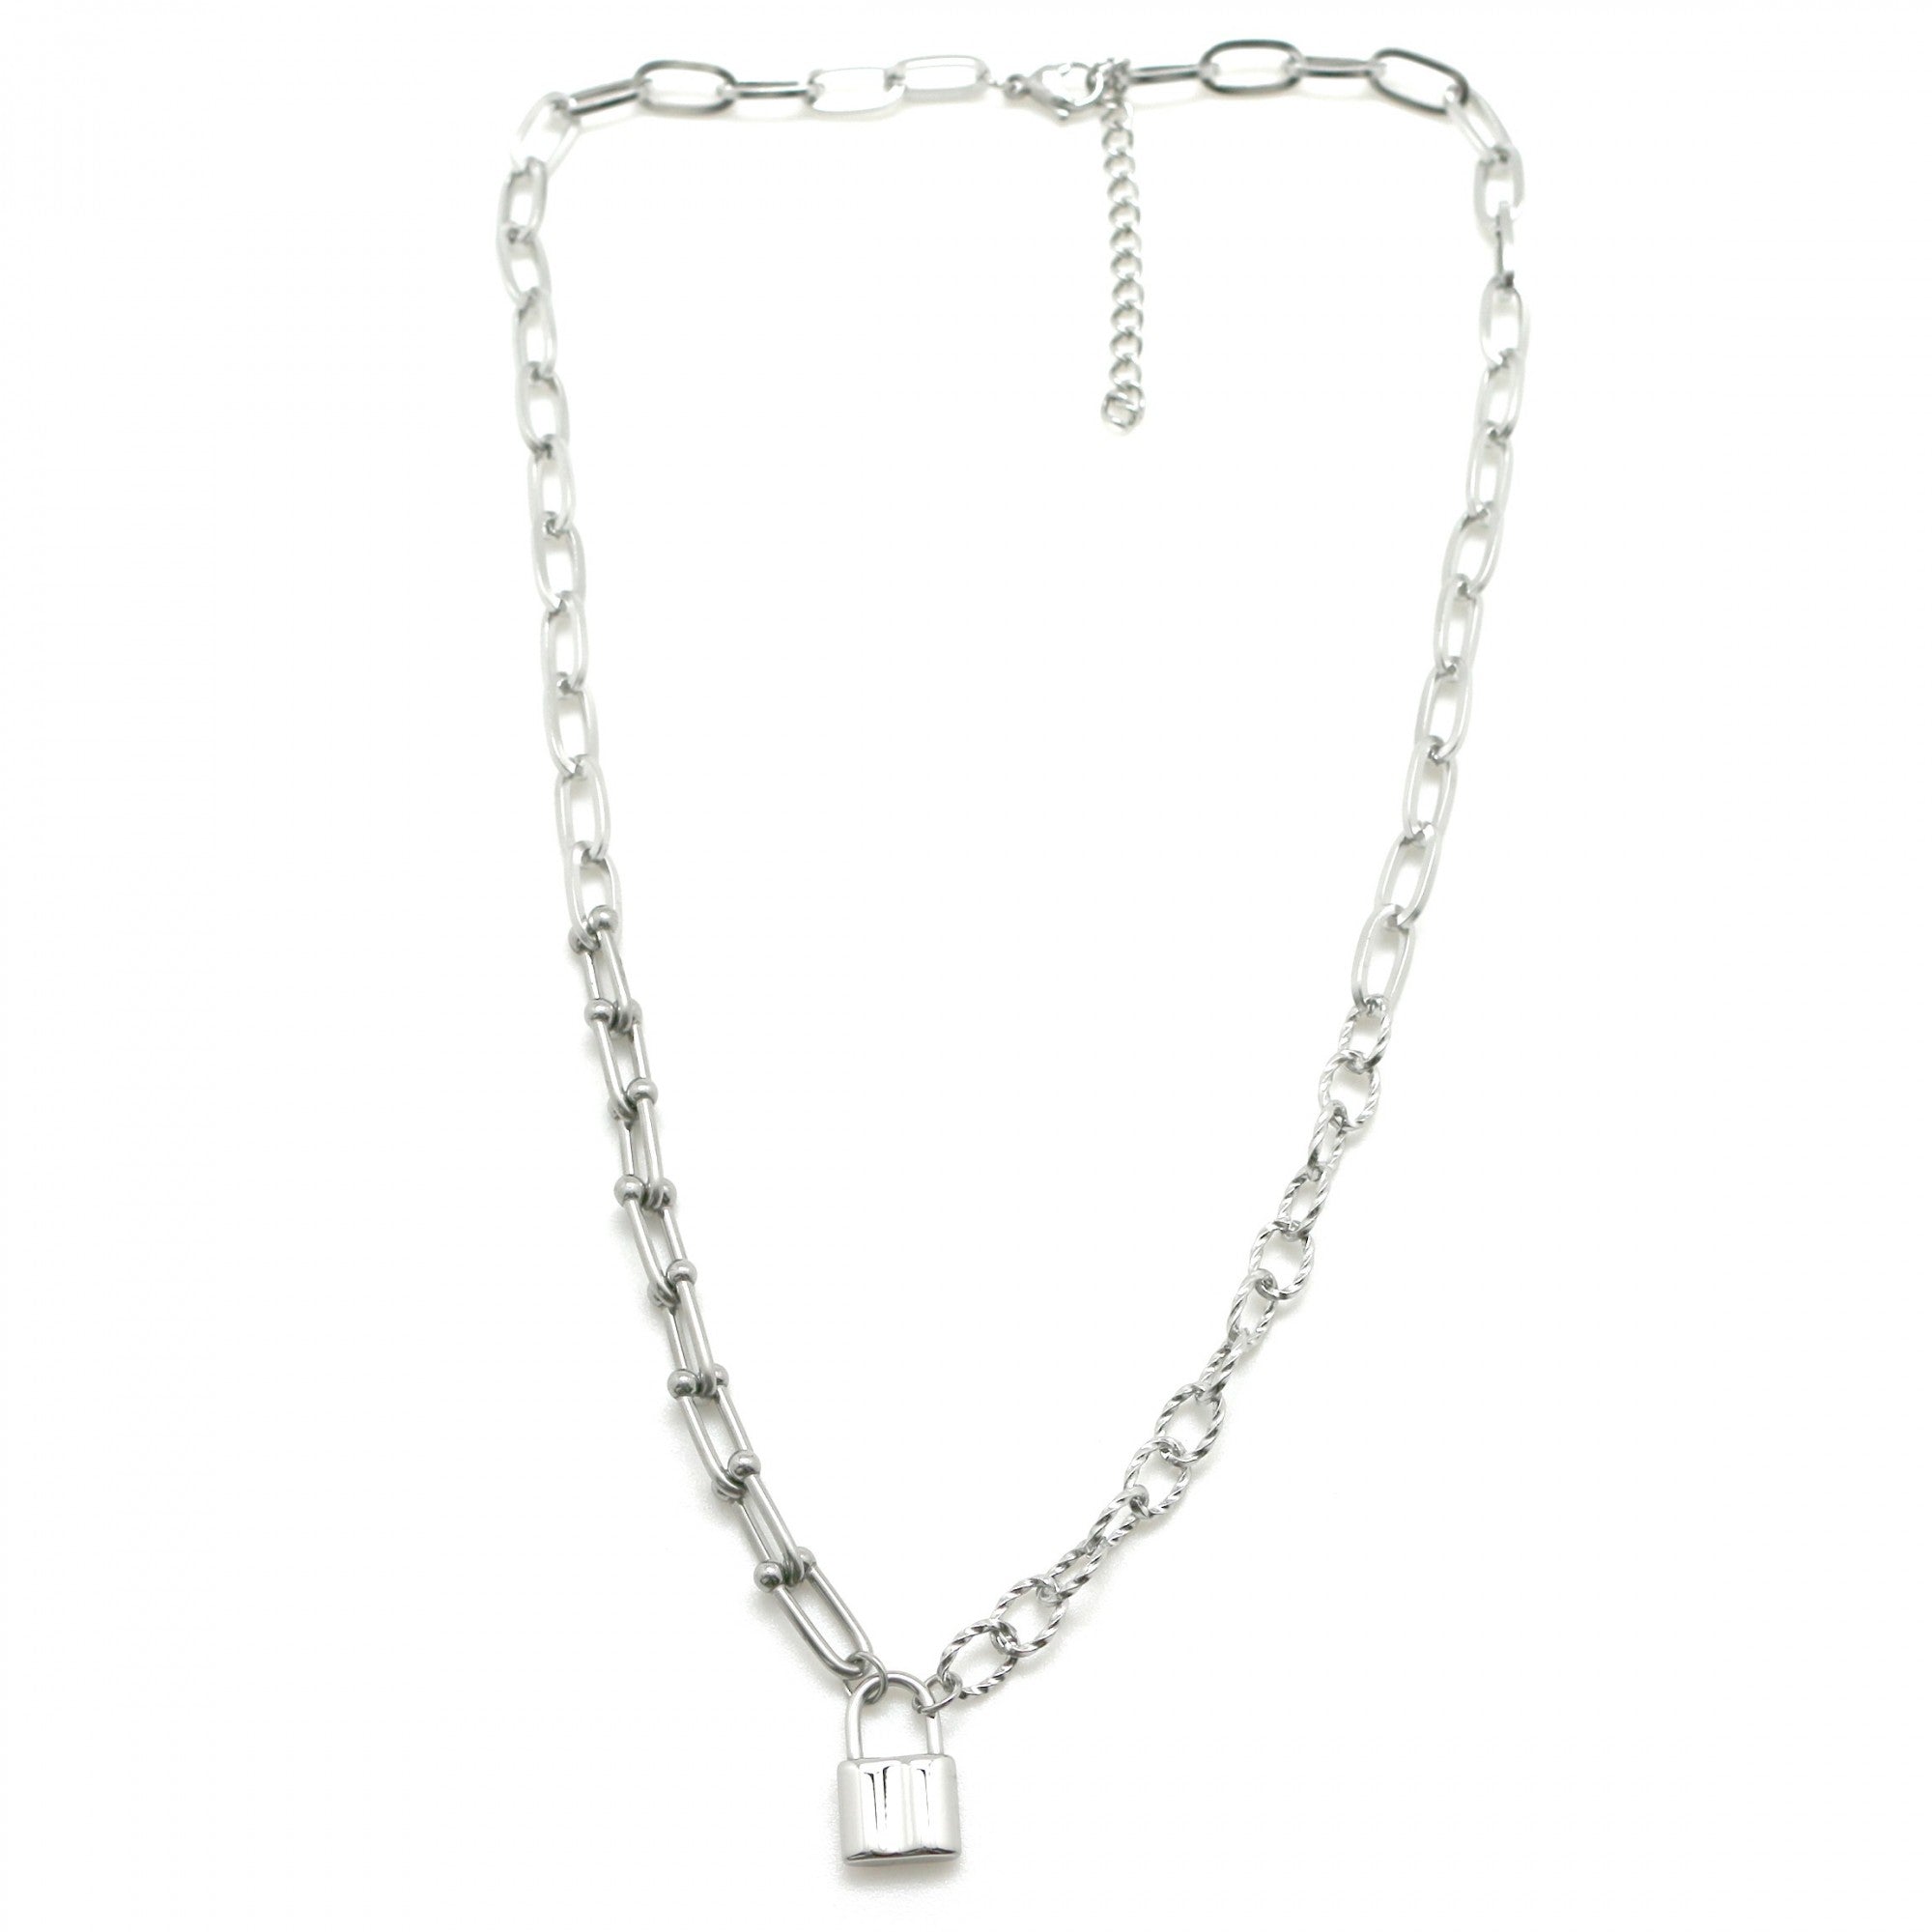 Silver padlock chain necklace